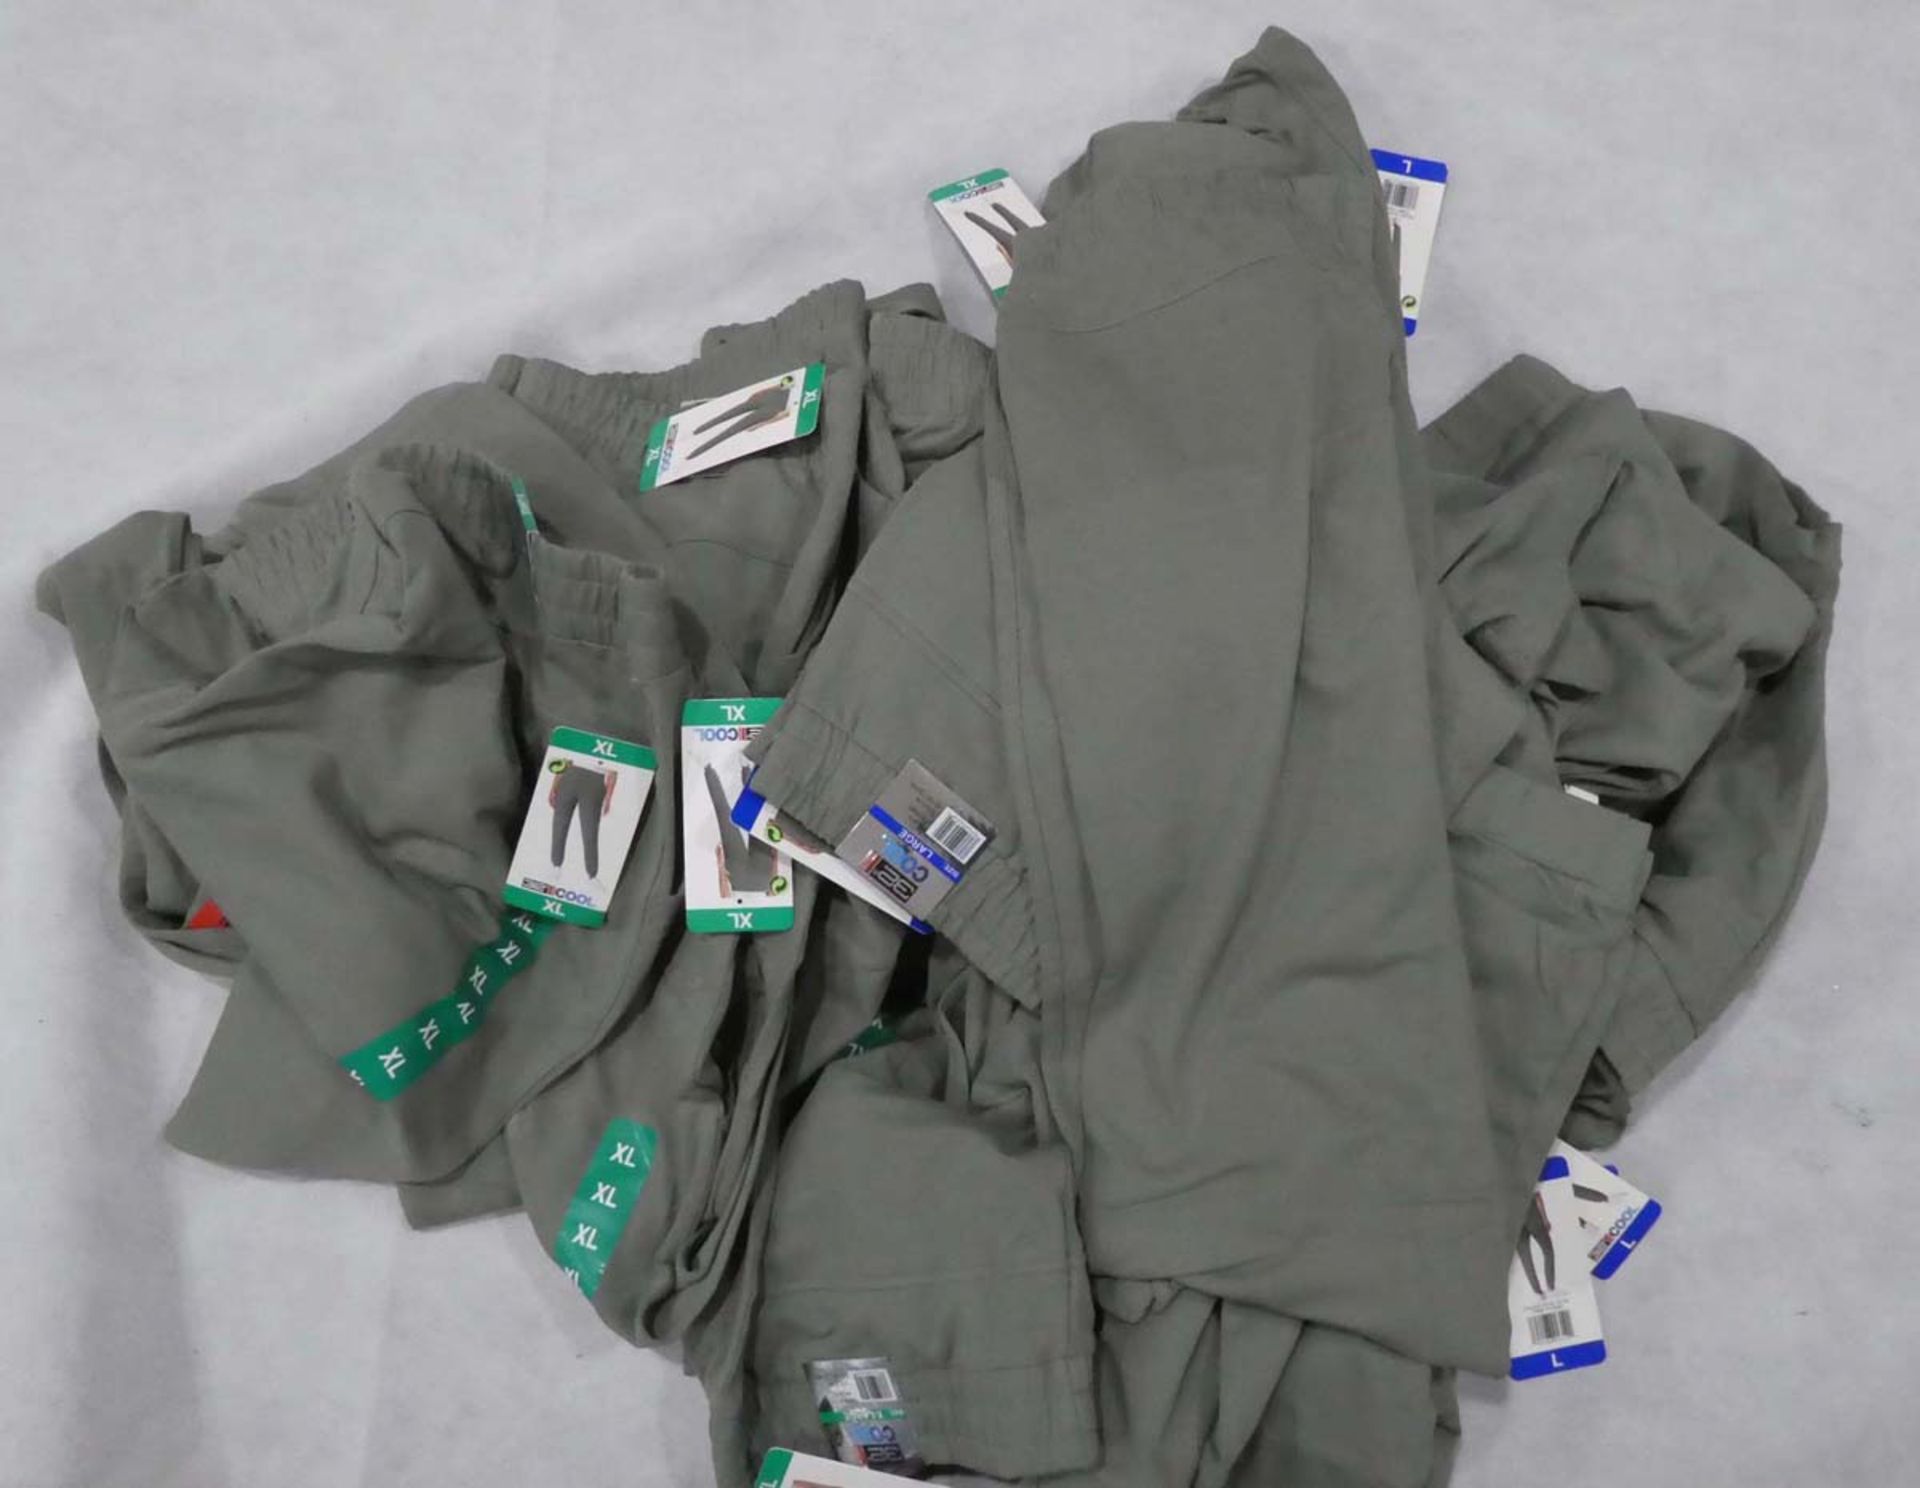 Selection of 32 degree cool joggers in green various sizes